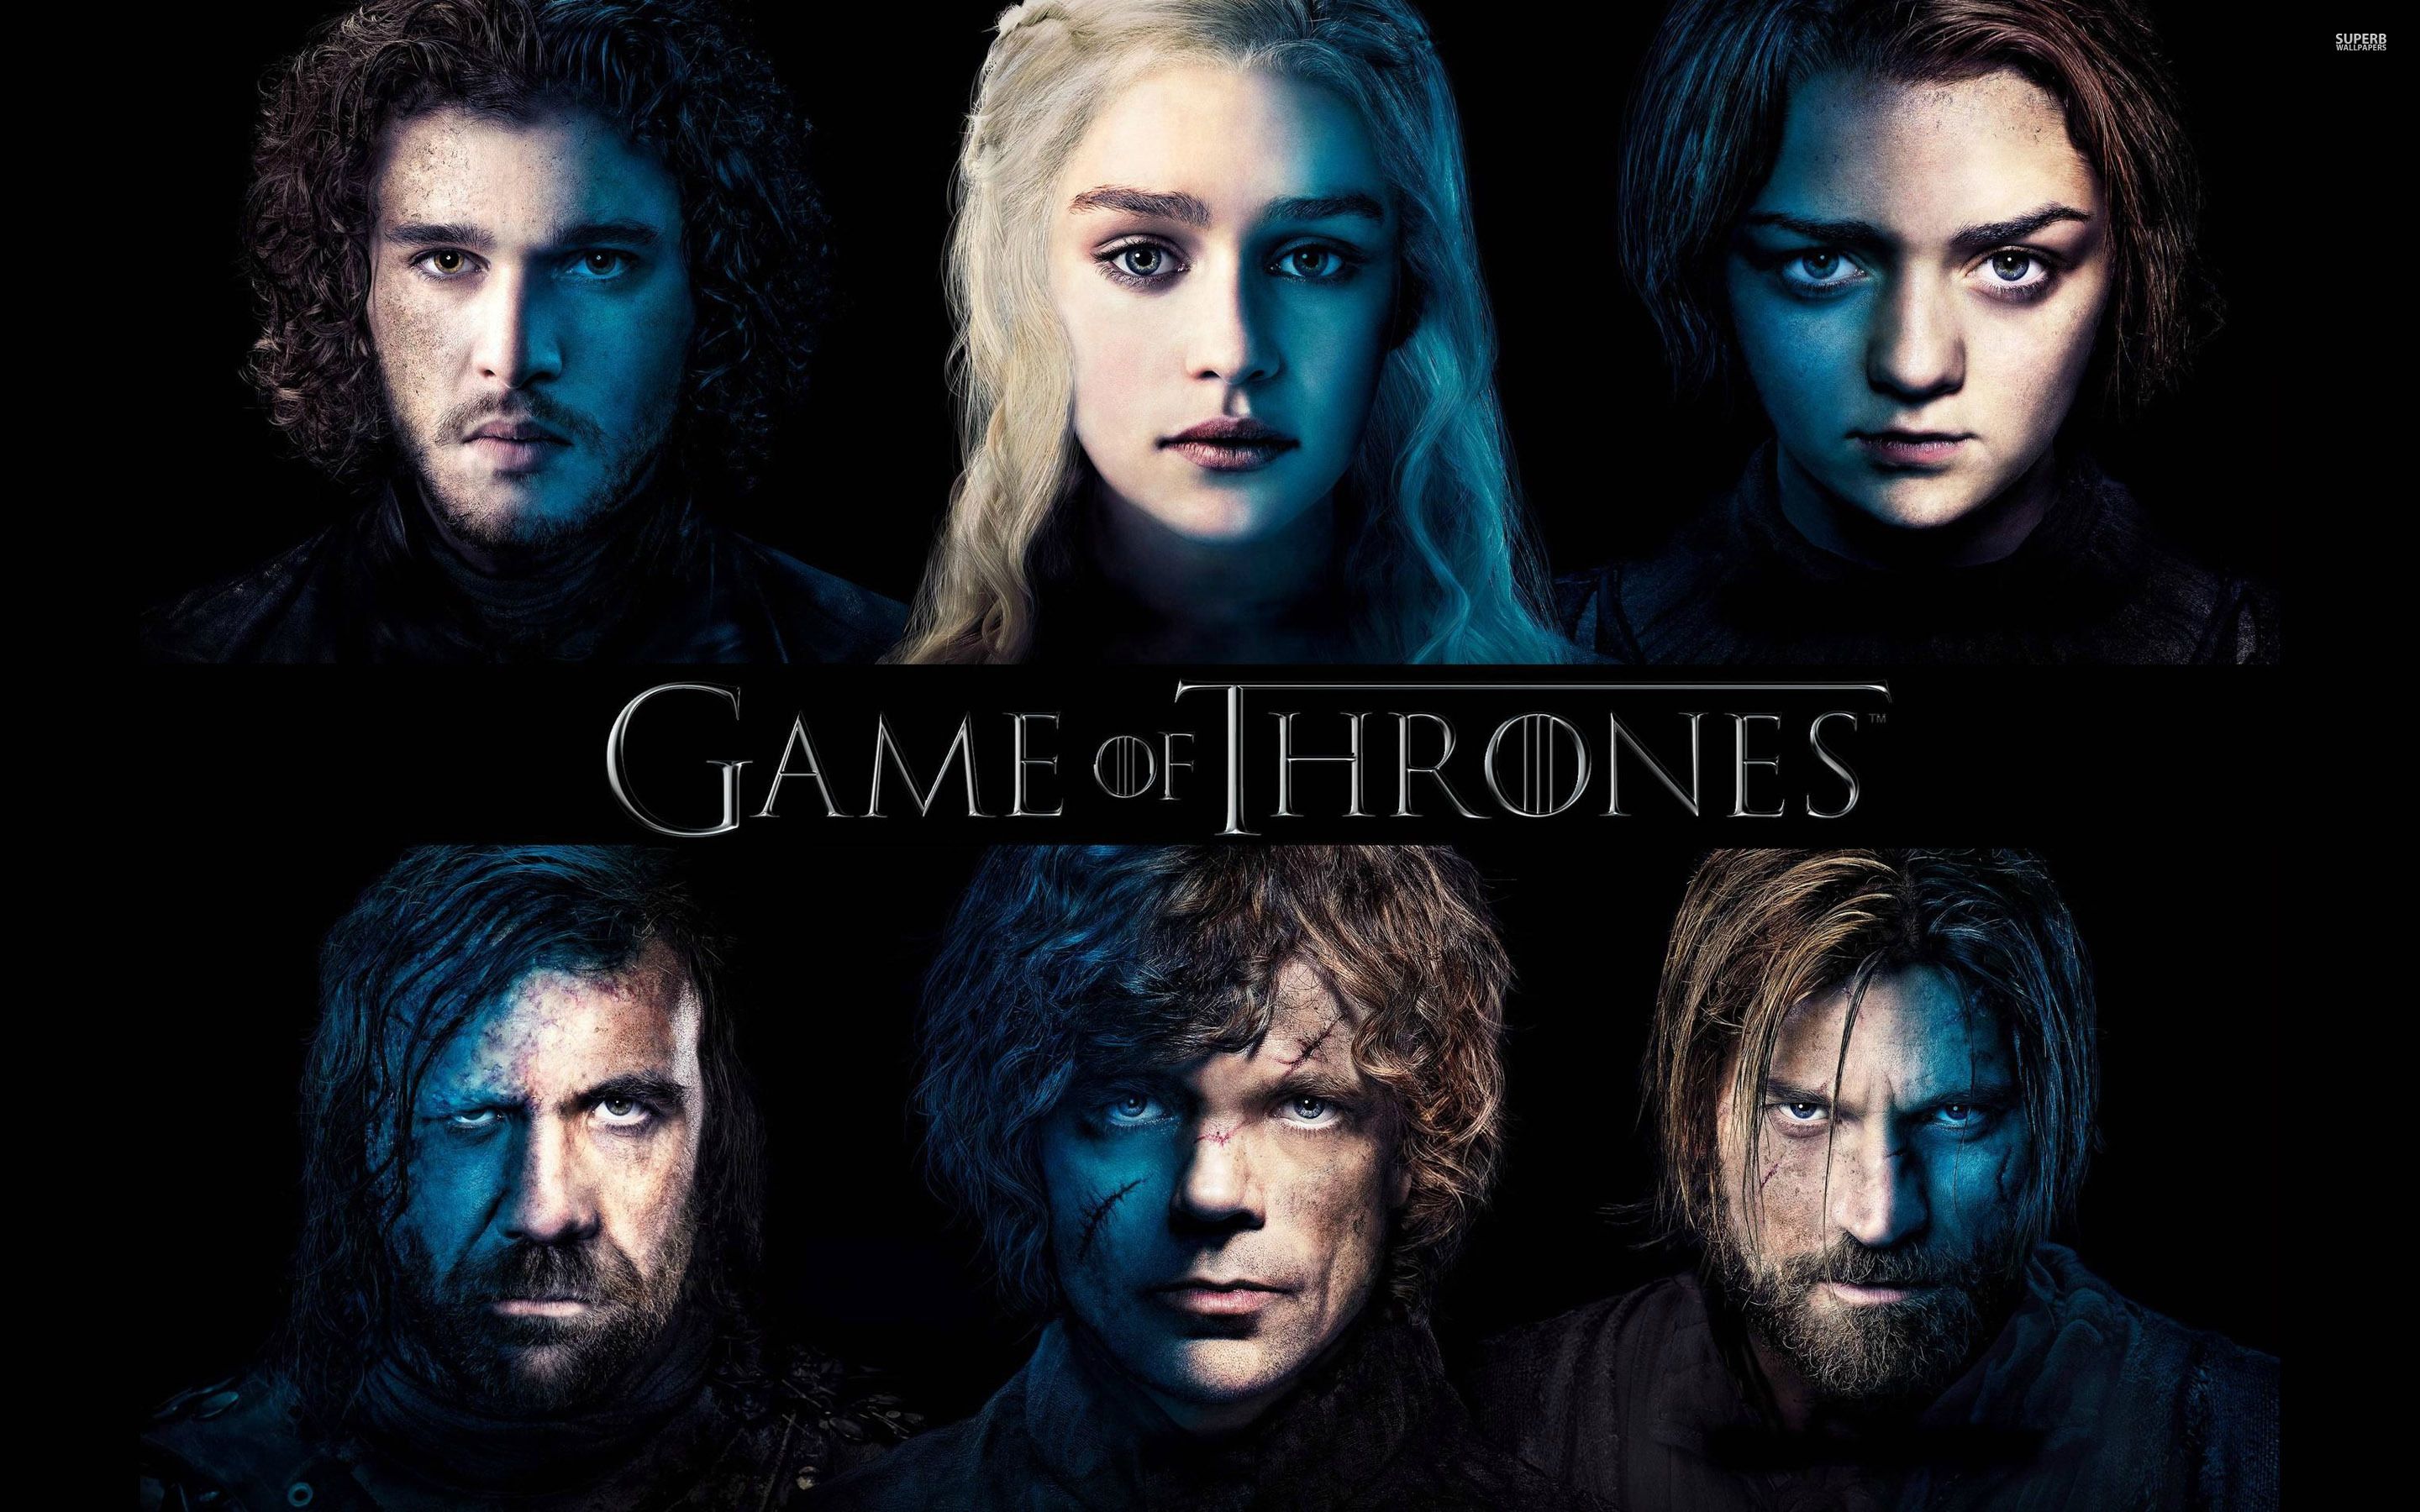 Game of Thrones Wallpaper HD